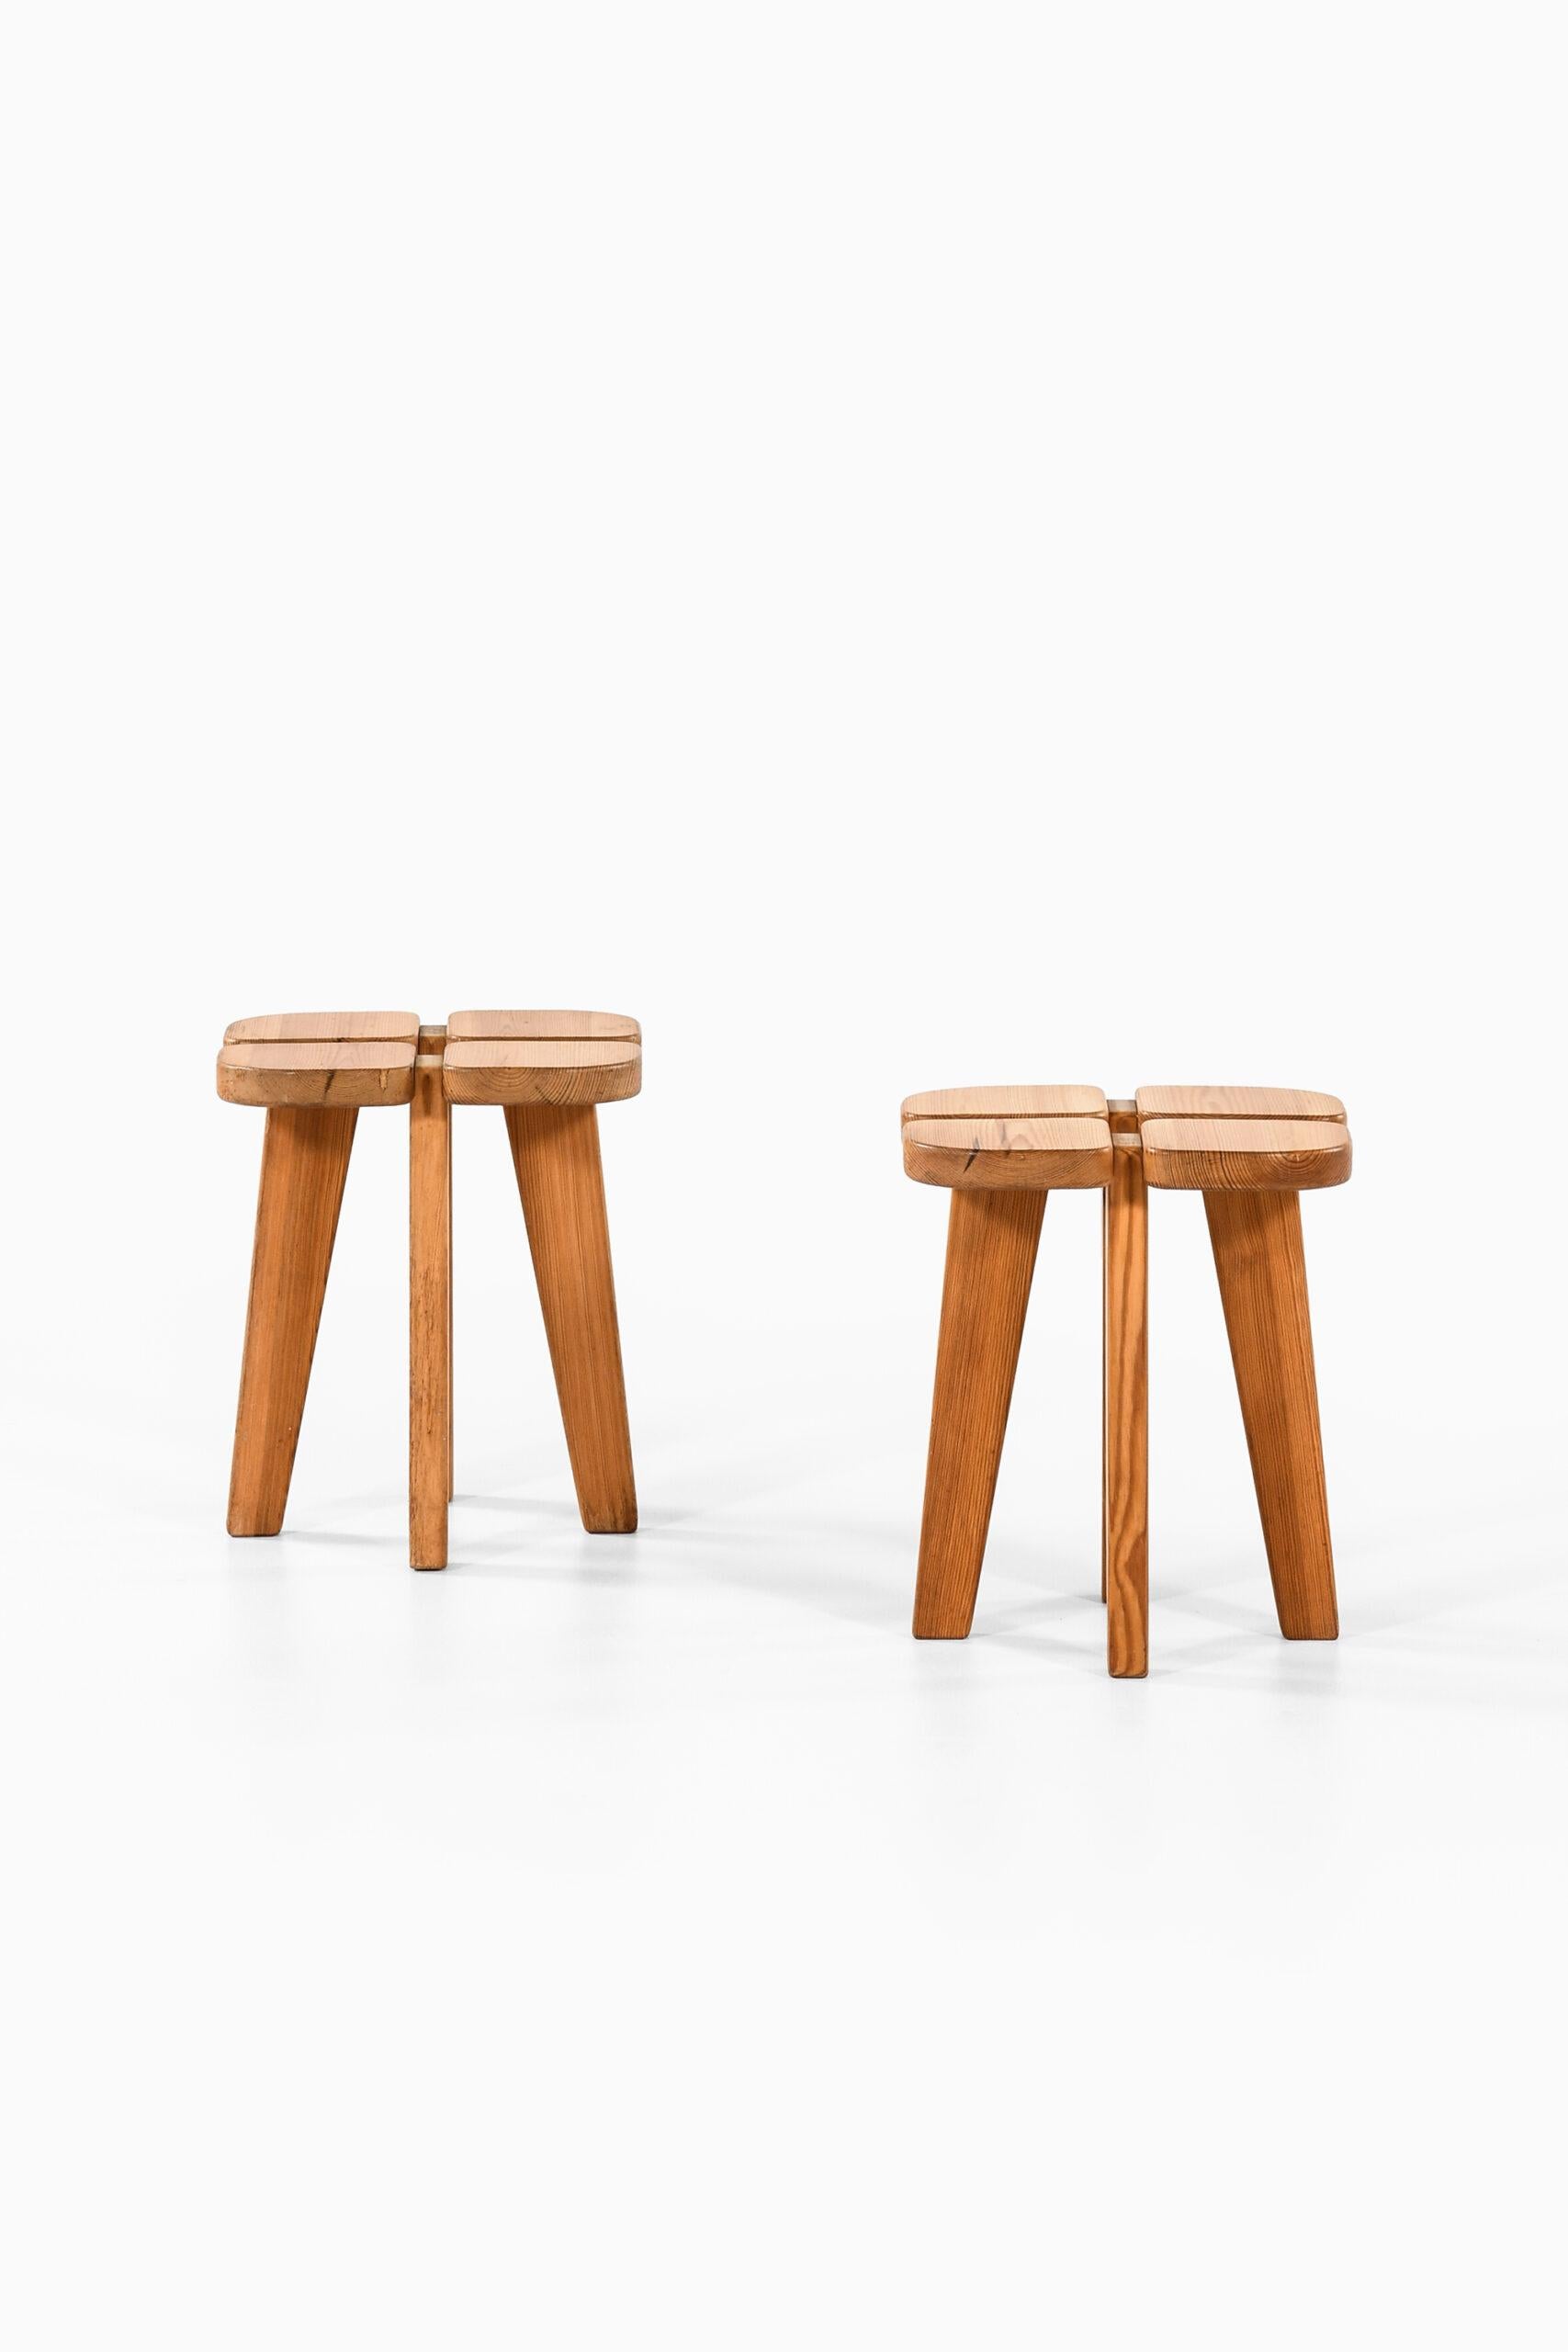 Rare pair of stools model Apila designed by Lisa Johansson-Pape. Produced by Stockmann Oy in Finland.